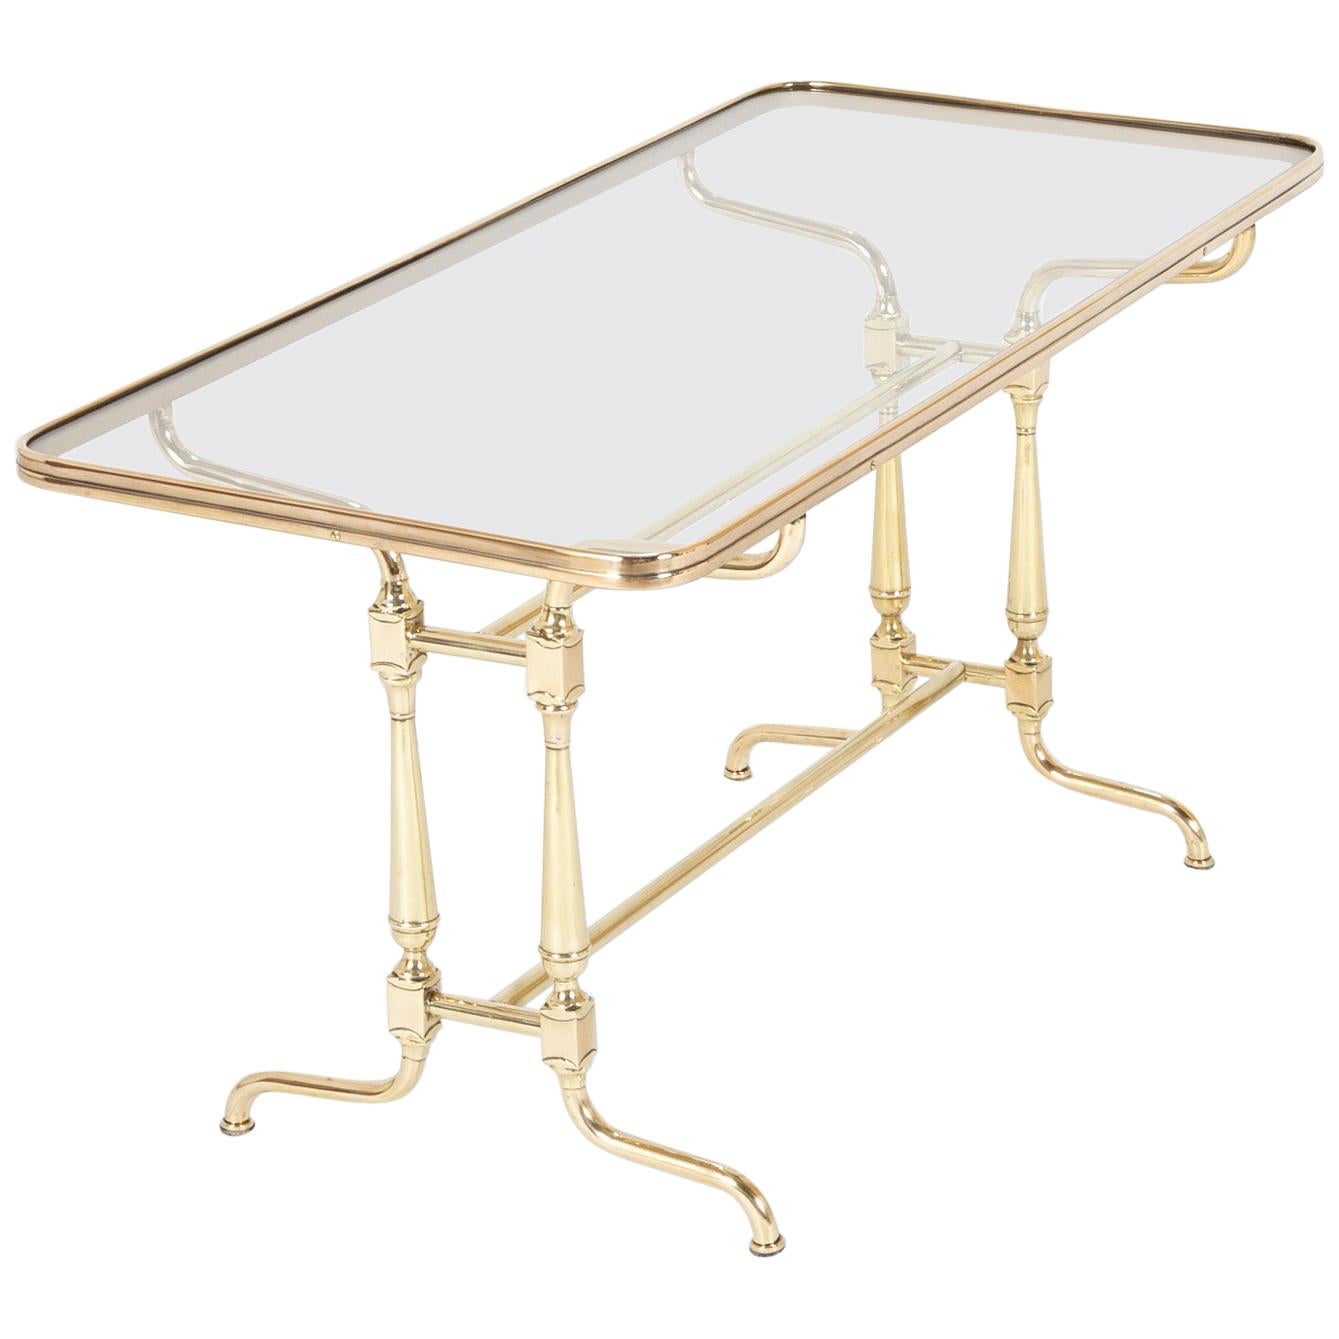 Early 20th Century French Glass Top Brass Coffee Table